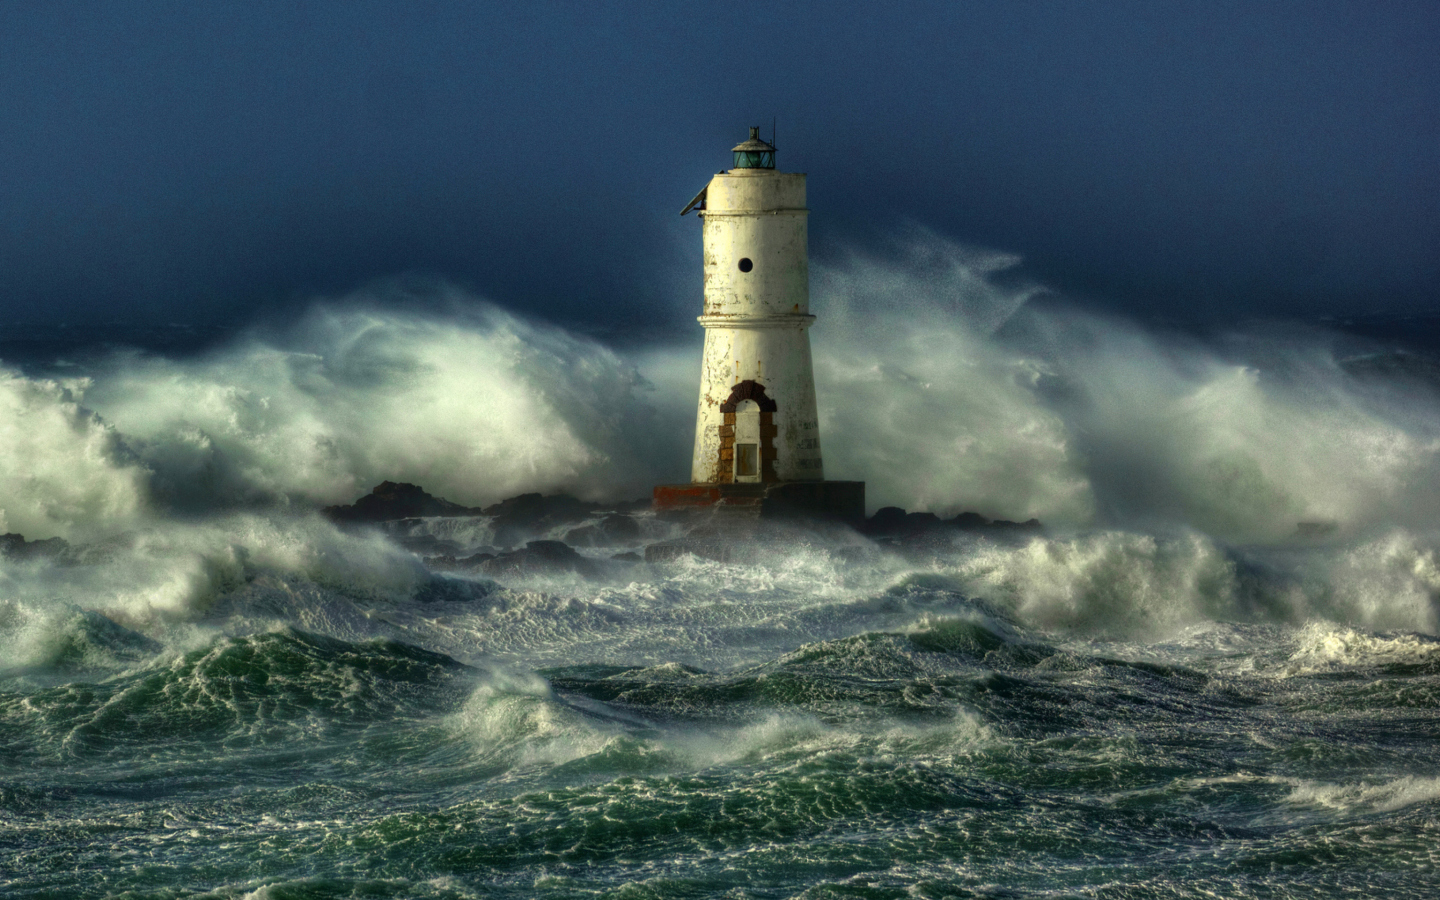 Ocean Storm And Lonely Lighthouse wallpaper 1440x900